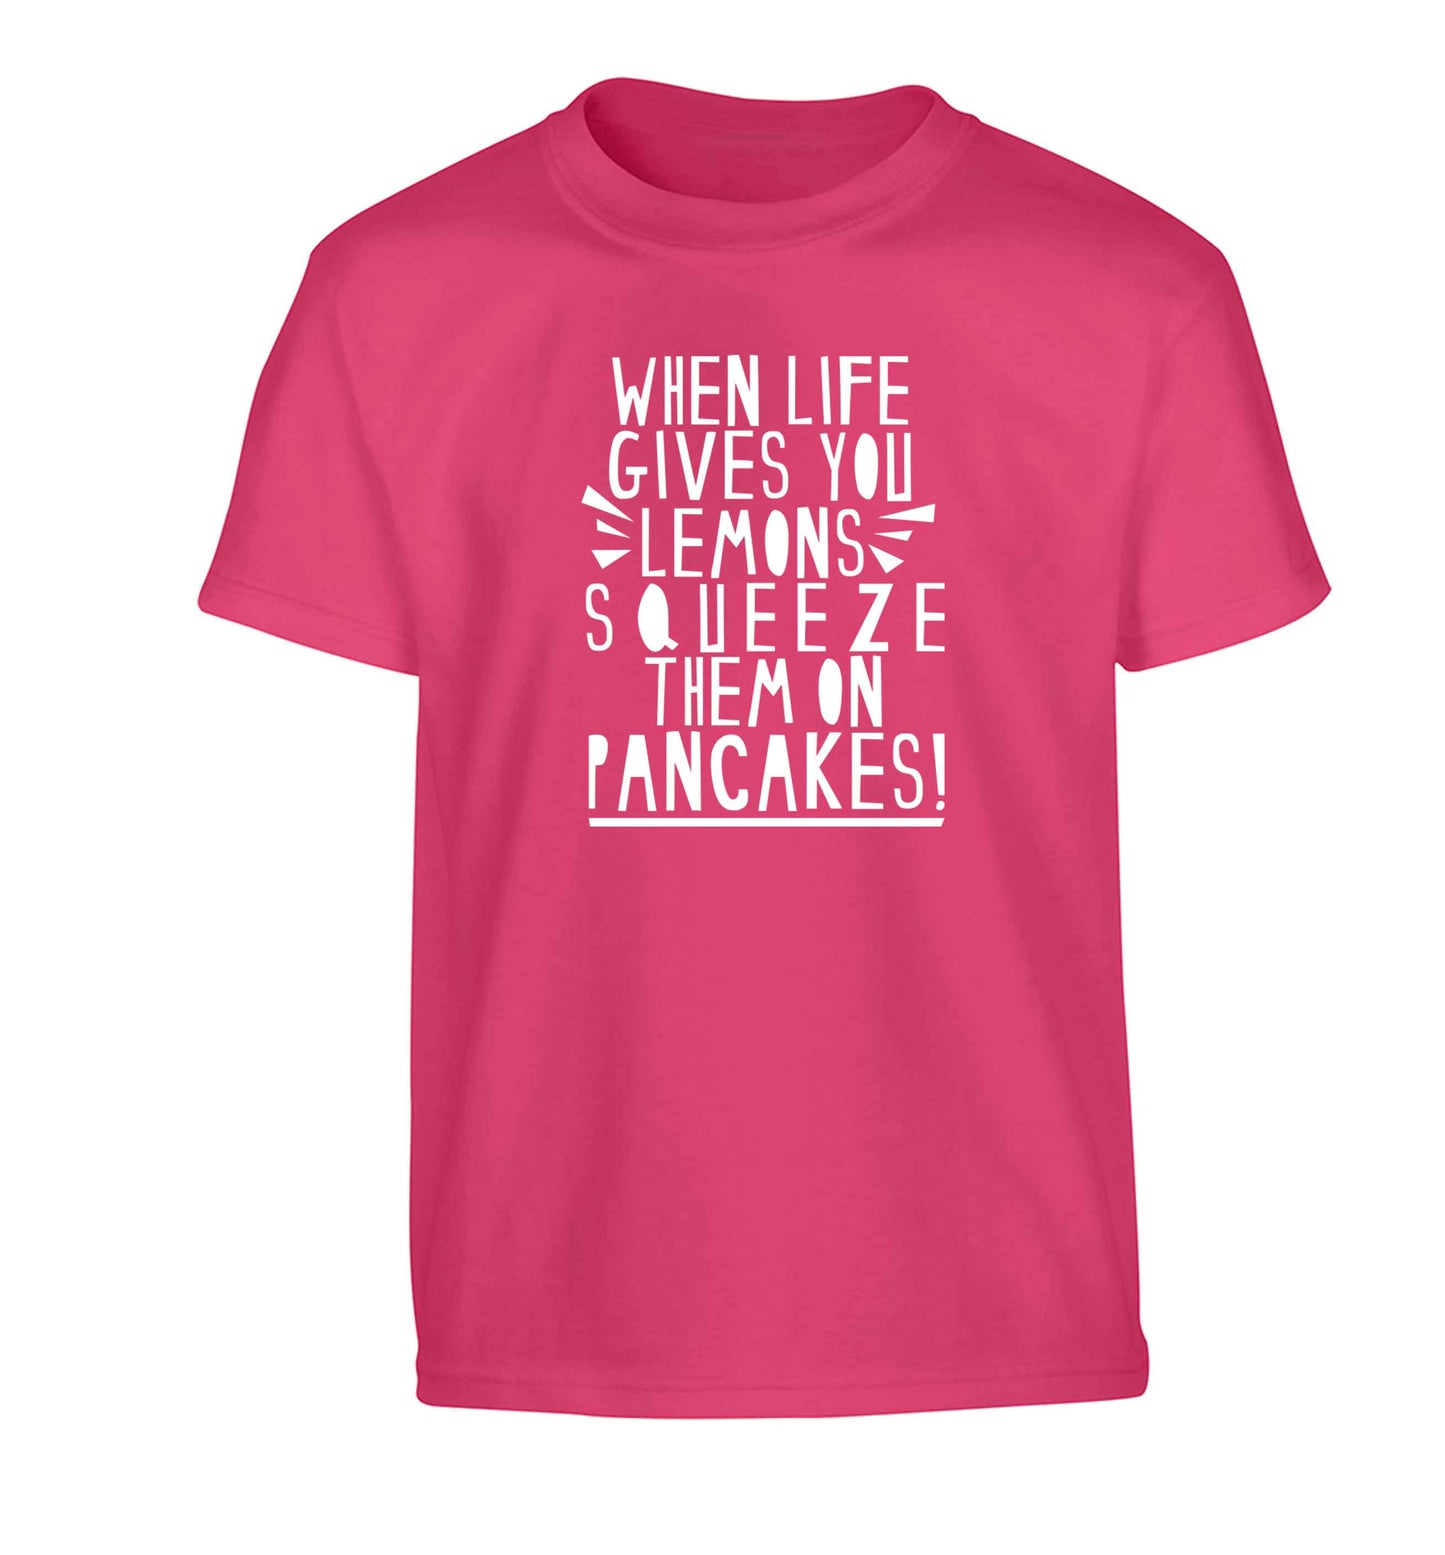 When life gives you lemons squeeze them on pancakes! Children's pink Tshirt 12-13 Years